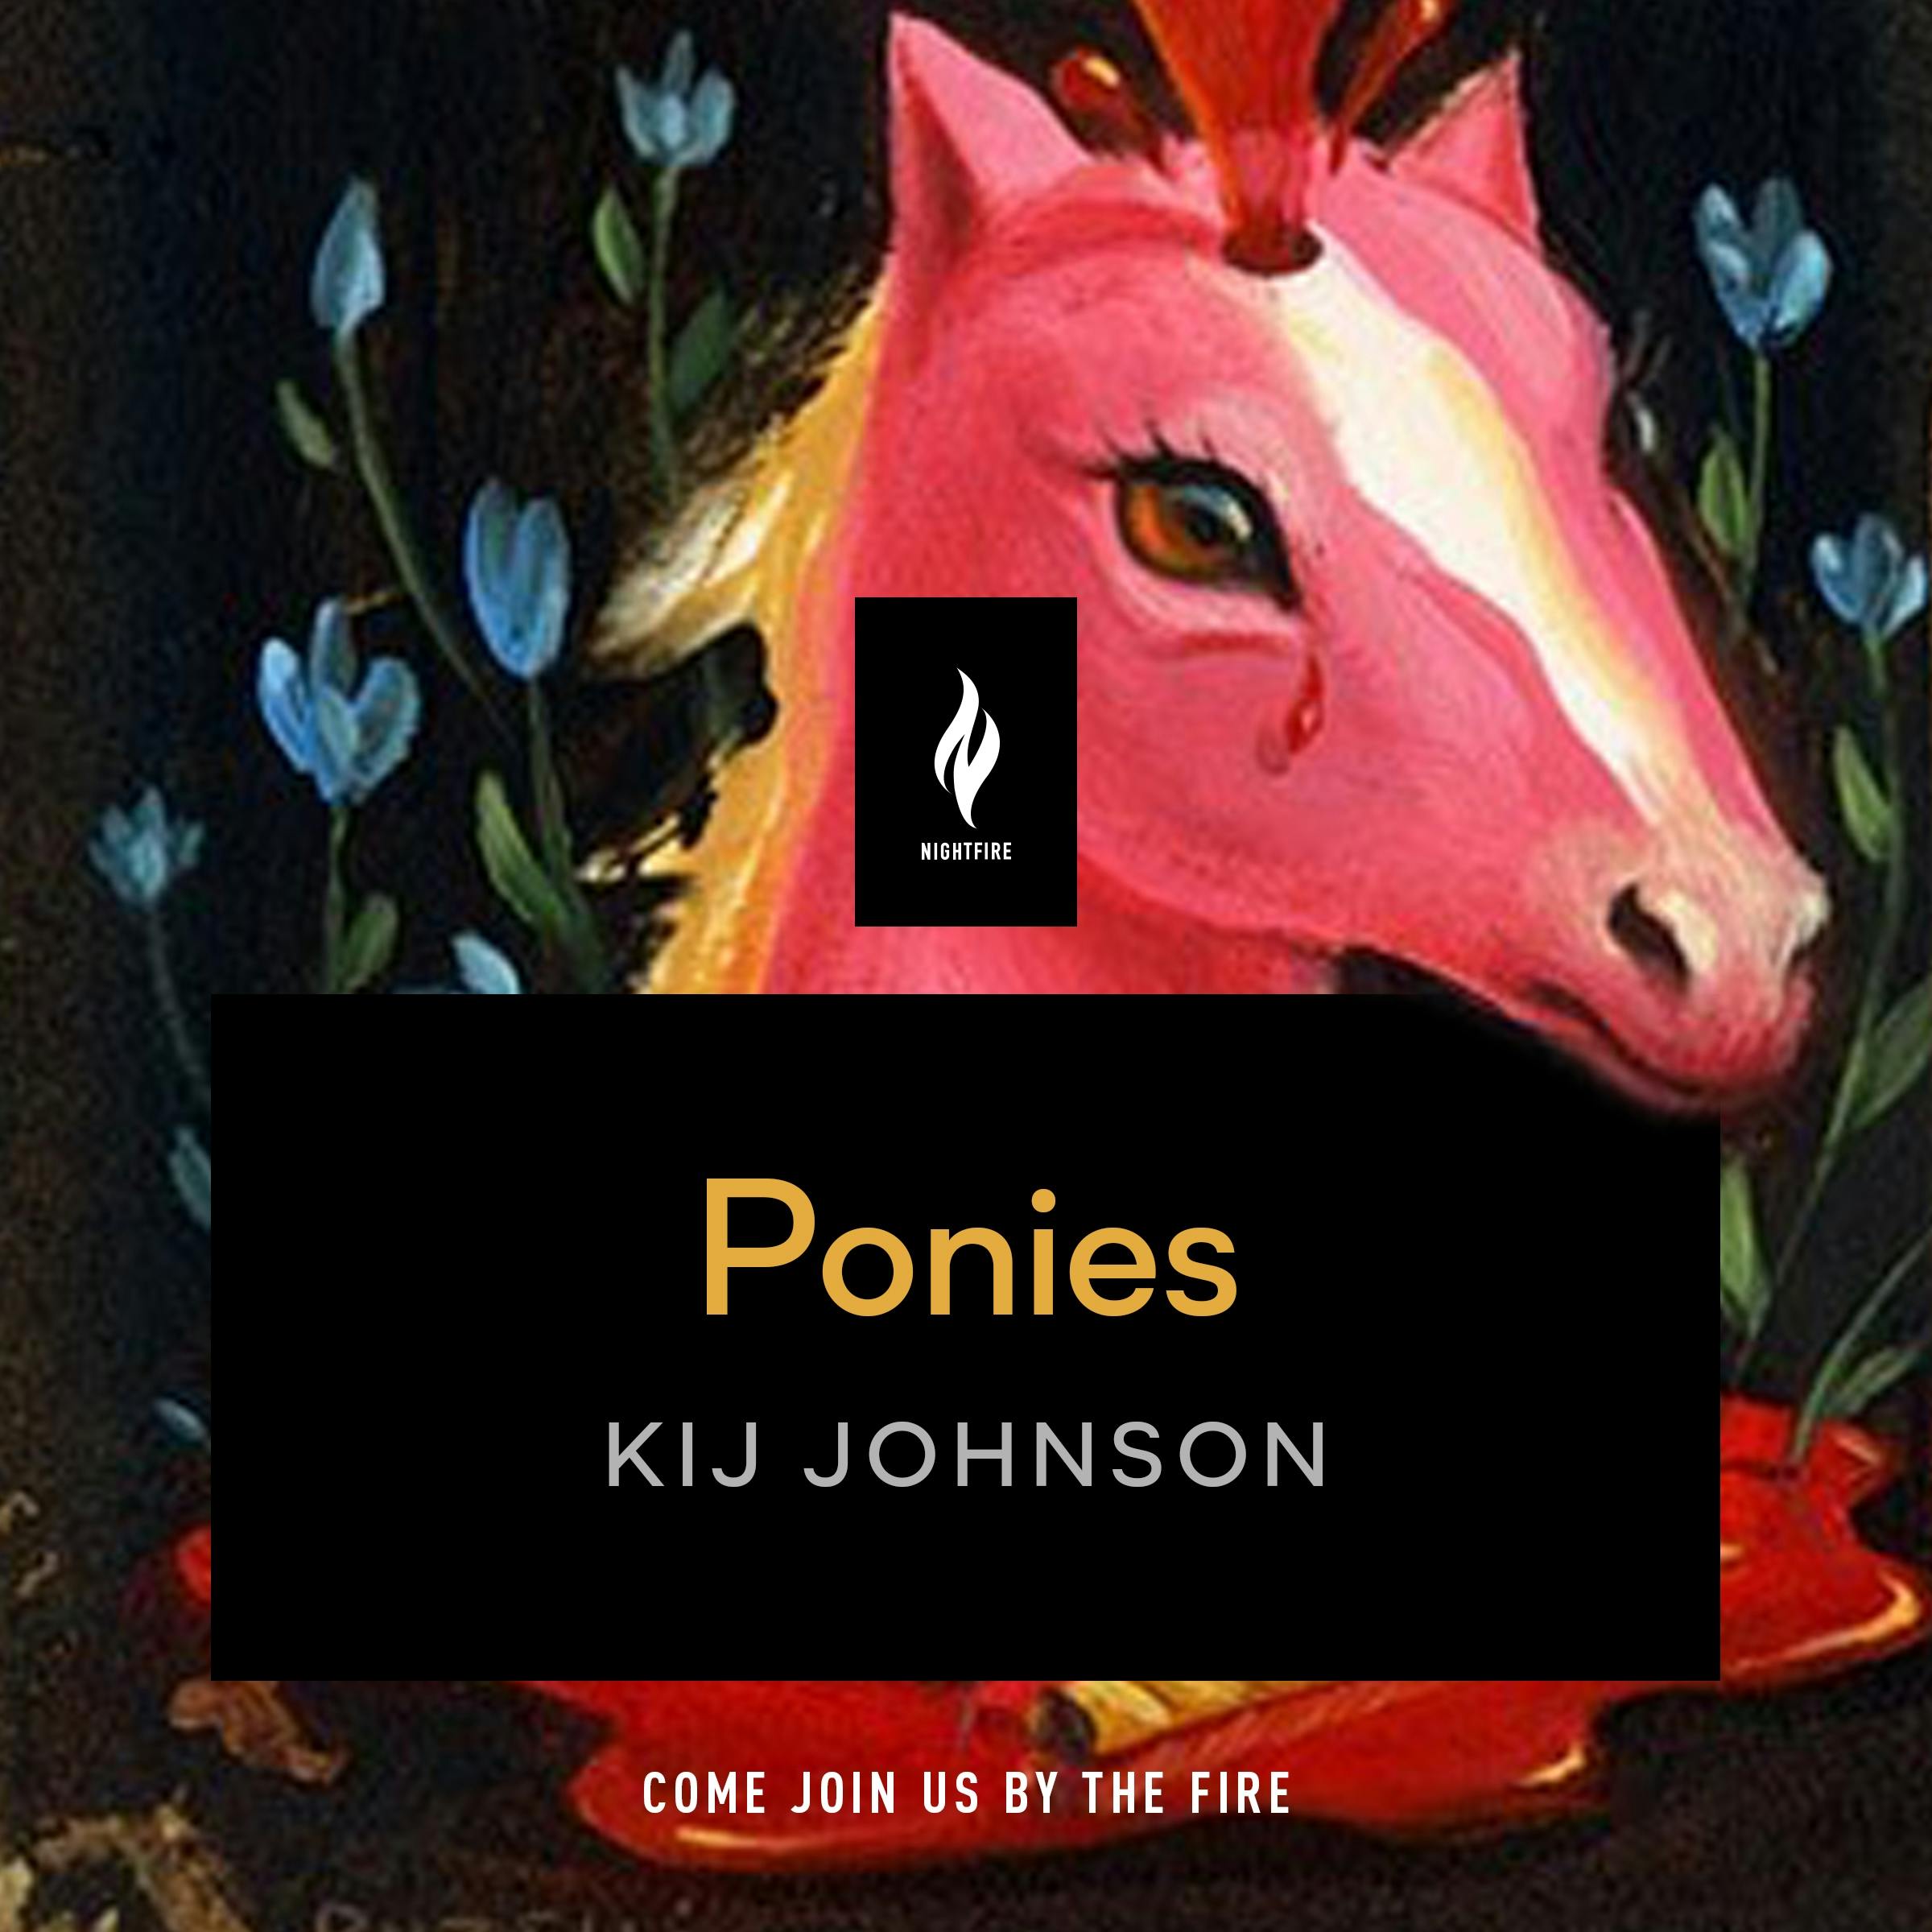 Cover for the book titled as: Ponies